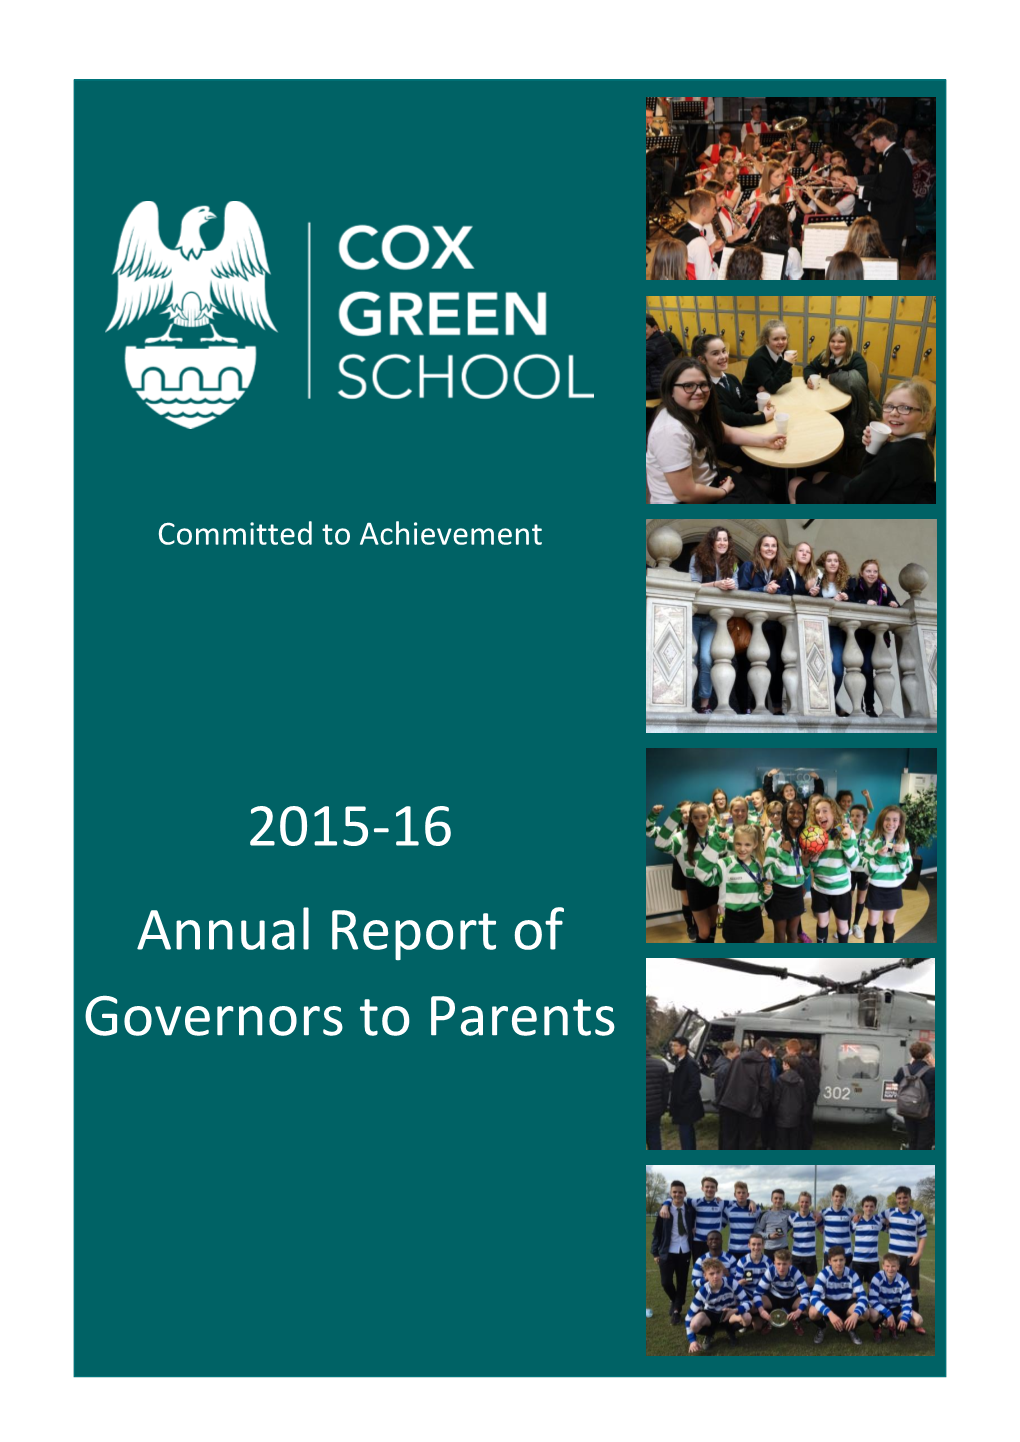 2015-16 Annual Report of Governors to Parents